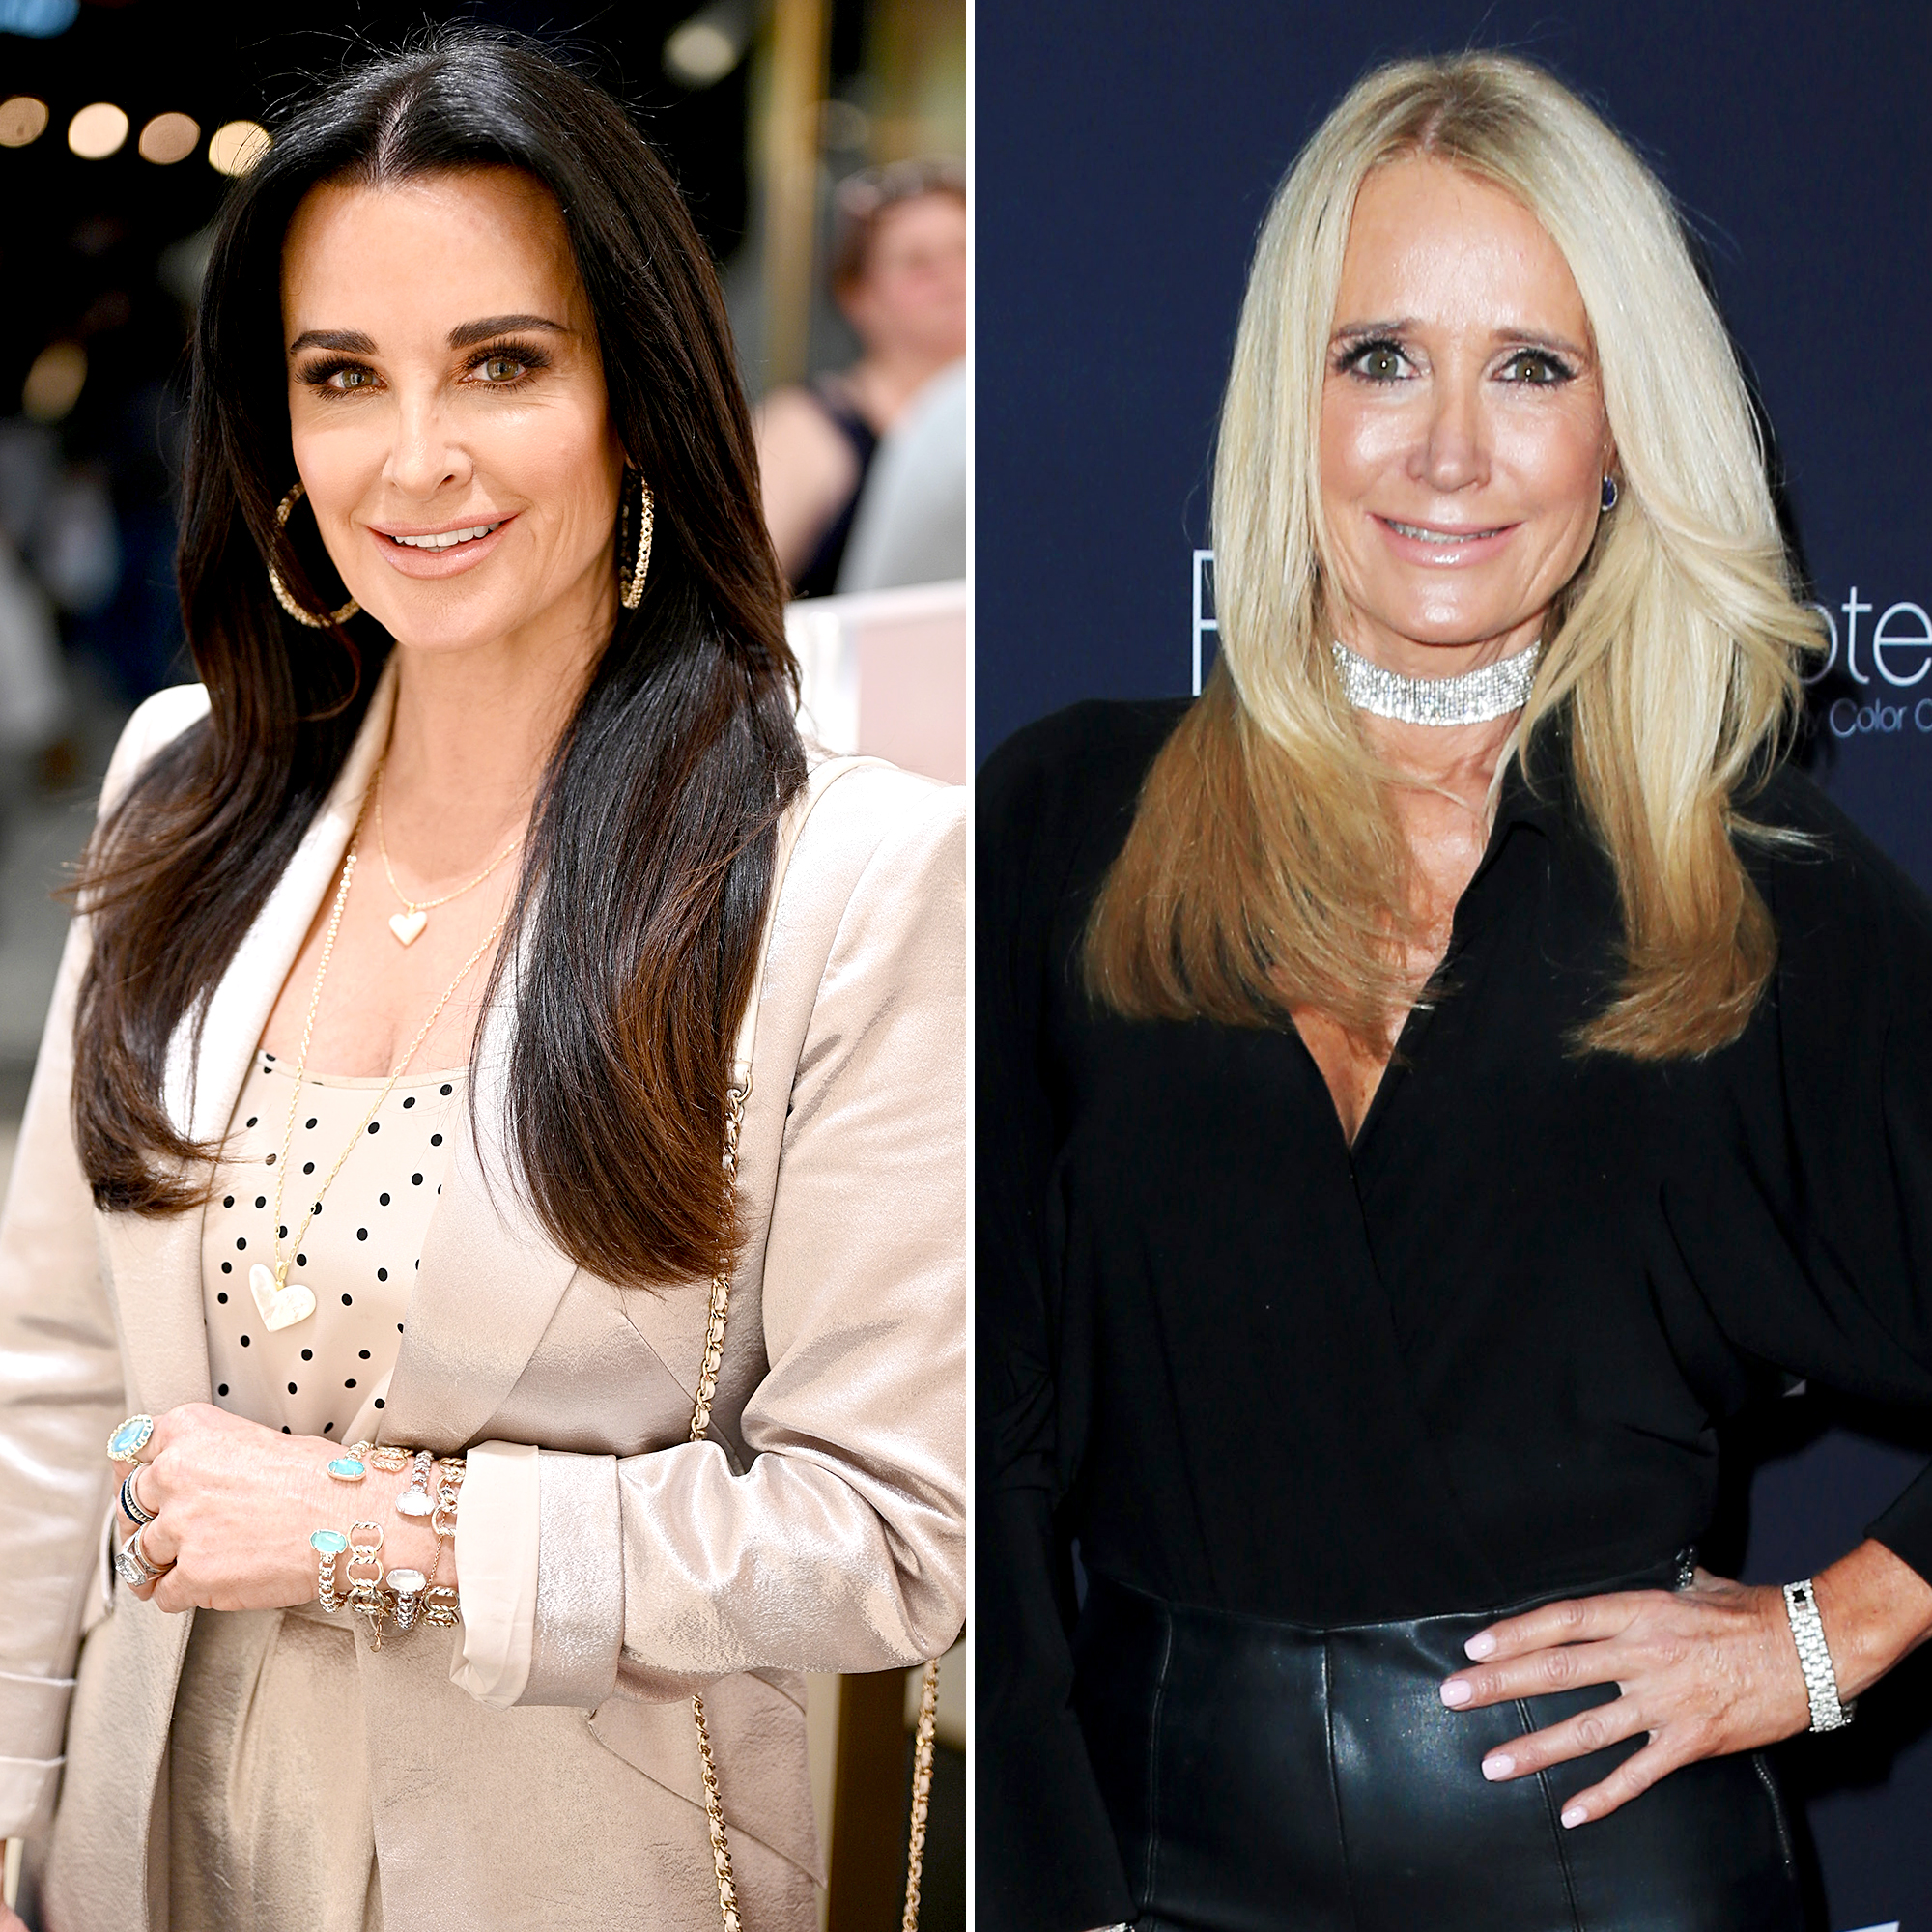 Kyle Richards just wants sister Kim to be happy and healthy